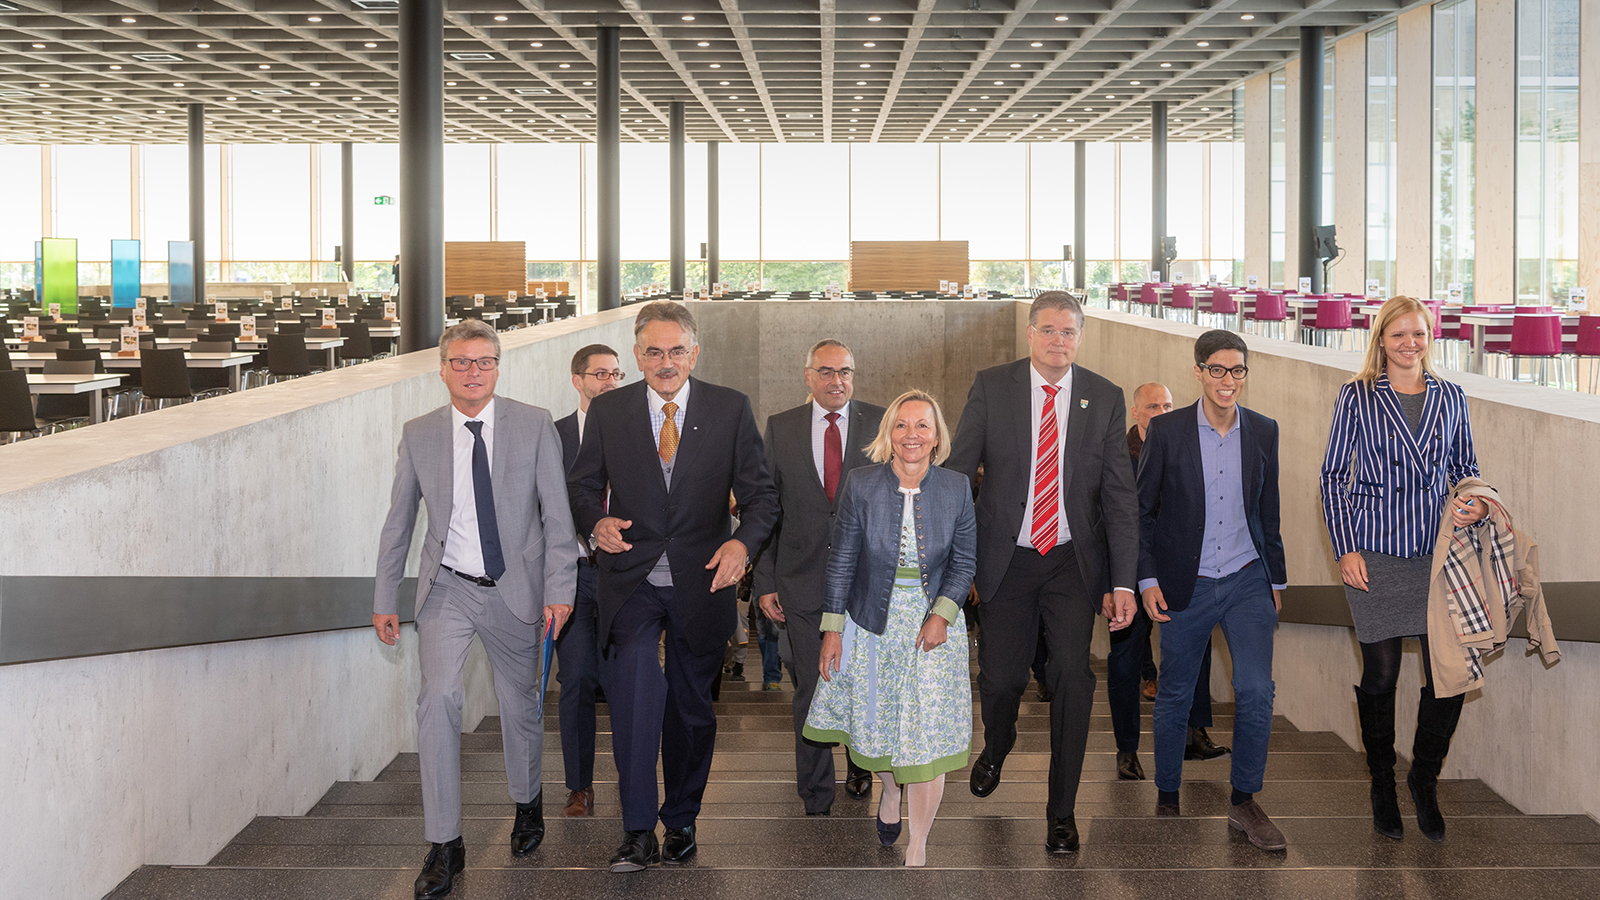 Opening of the new student cafeteria in Garching with Science Minister Sibler, TUM President Herrmann, Student Union Managing Director Wurzer-Faßnacht, Garching Mayor Dieter Gruchmann and student representatives Zaim Sari and Nora Weiner (1st row left to